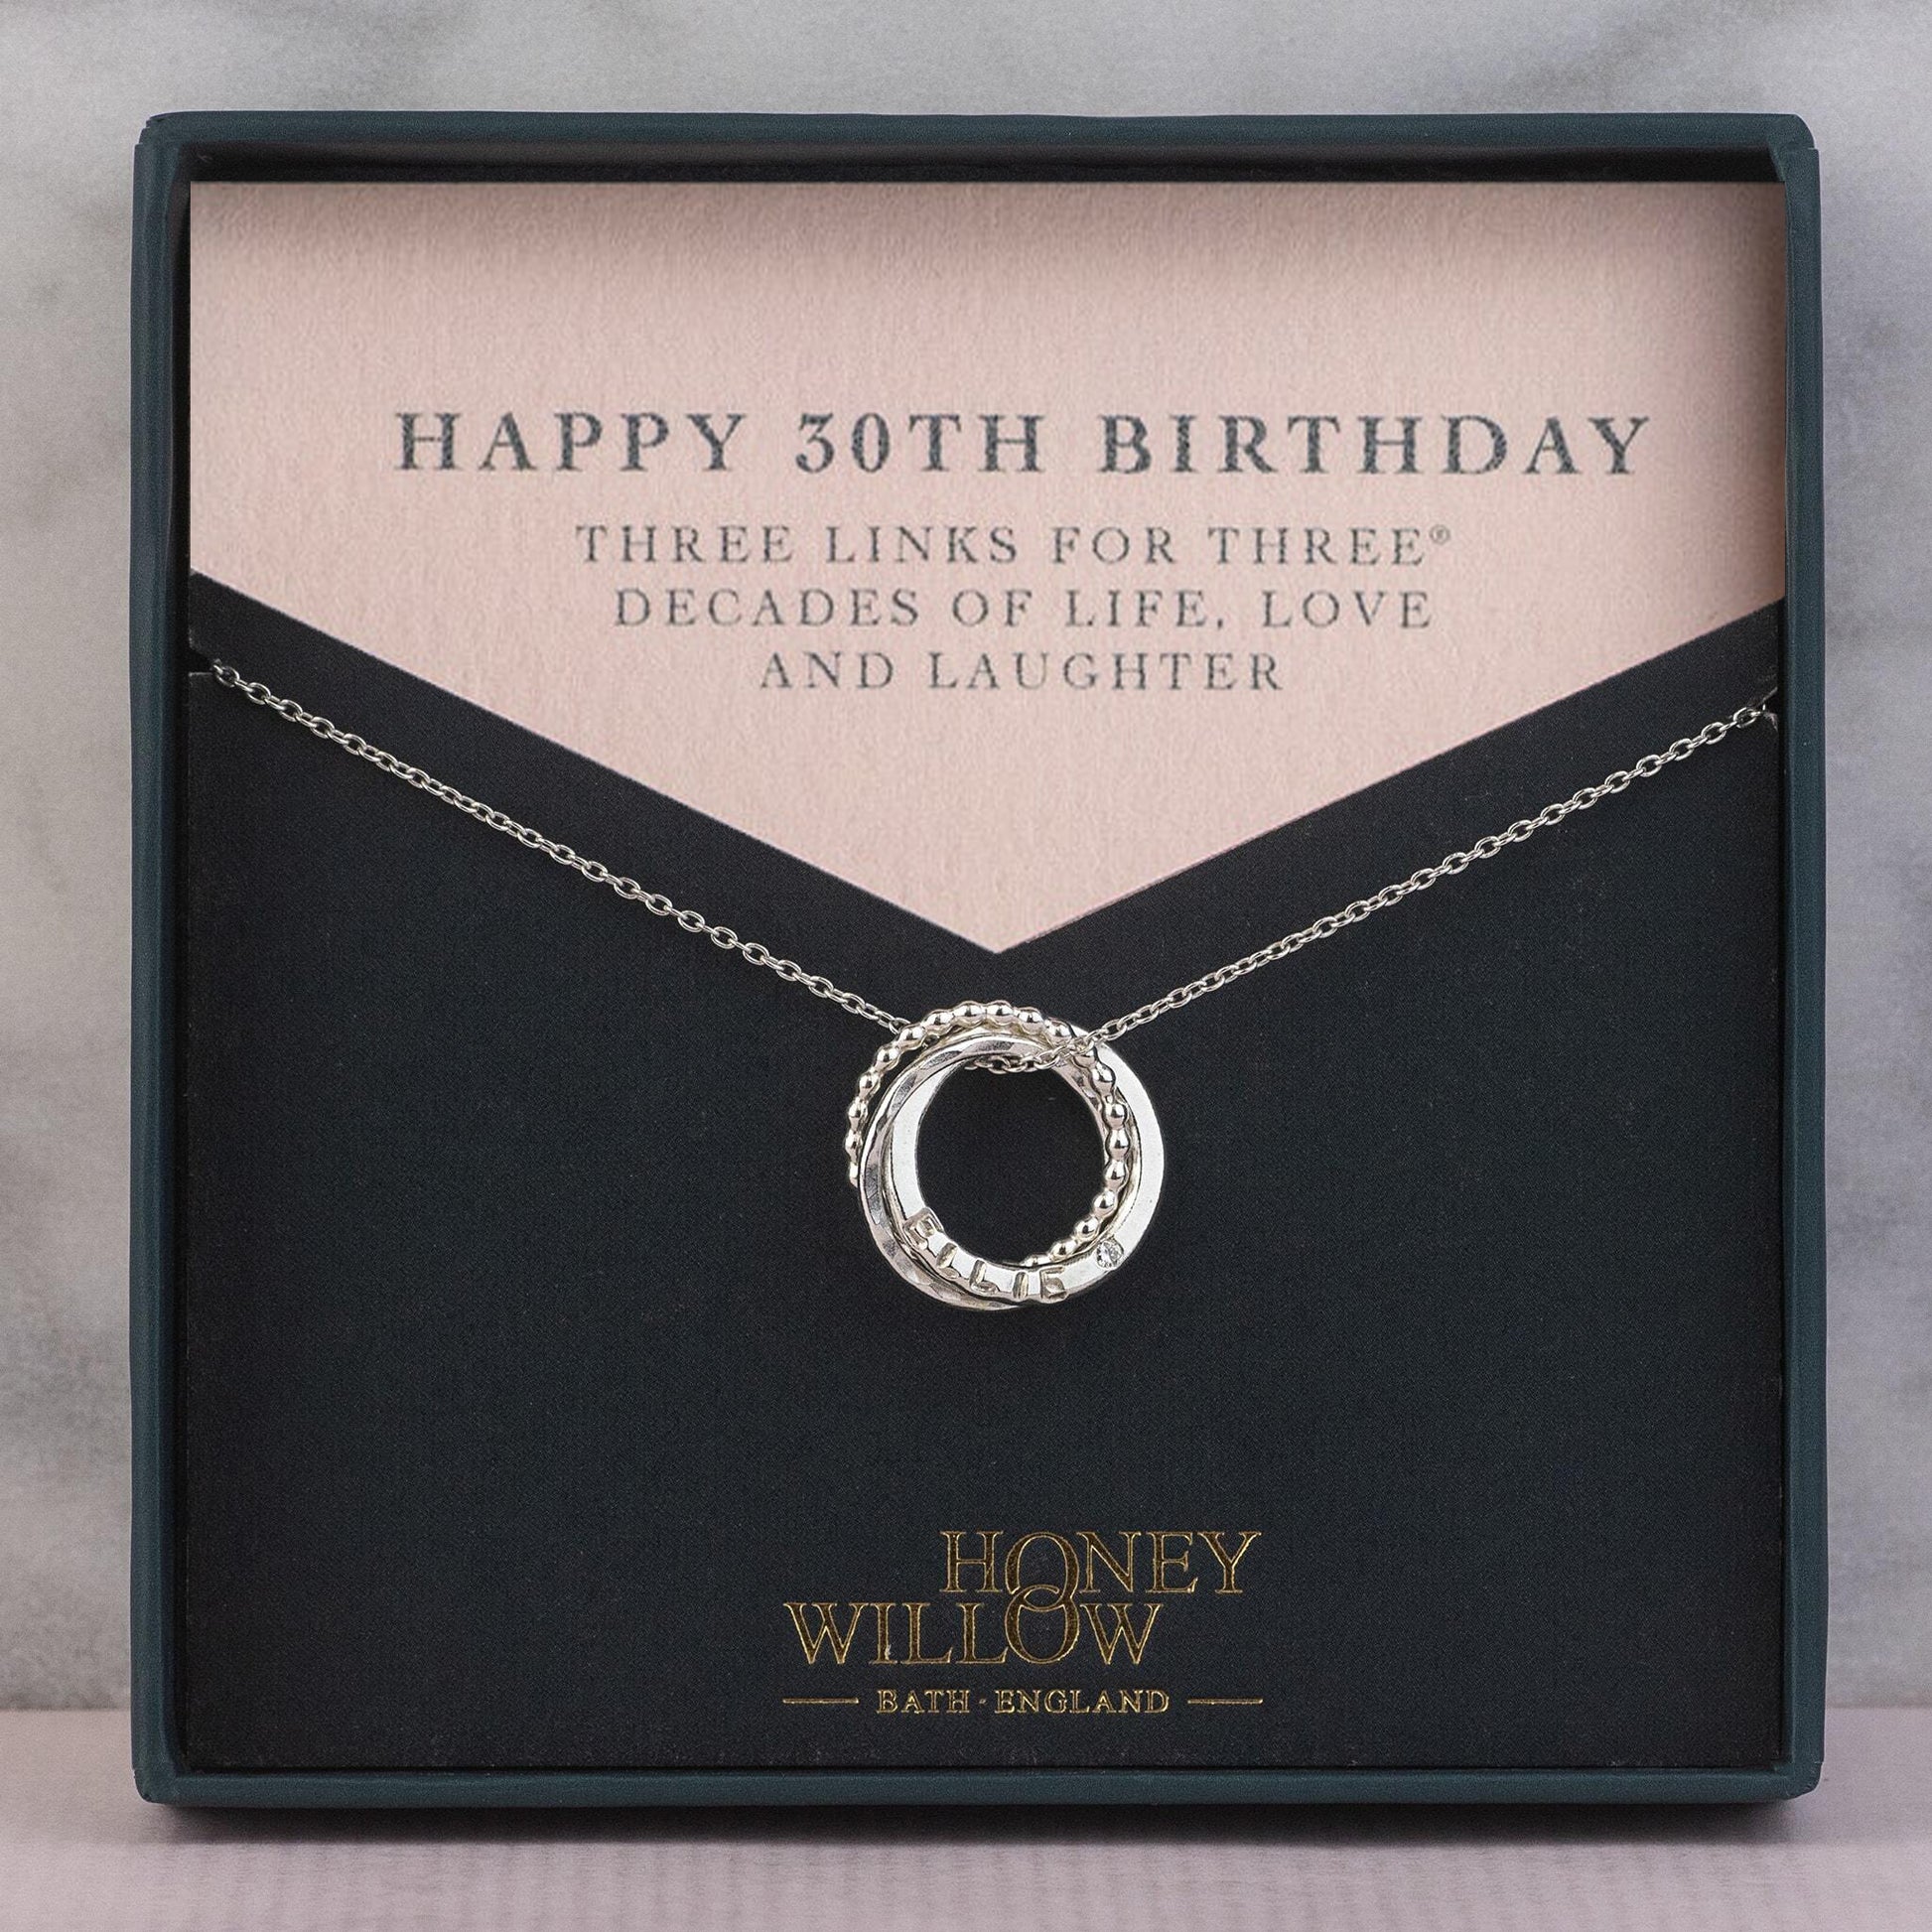 Personalised 30th Birthday Birthstone Necklace - Hand-Stamped - Petite Silver - The Original 3 Links for 3® Decades Necklace